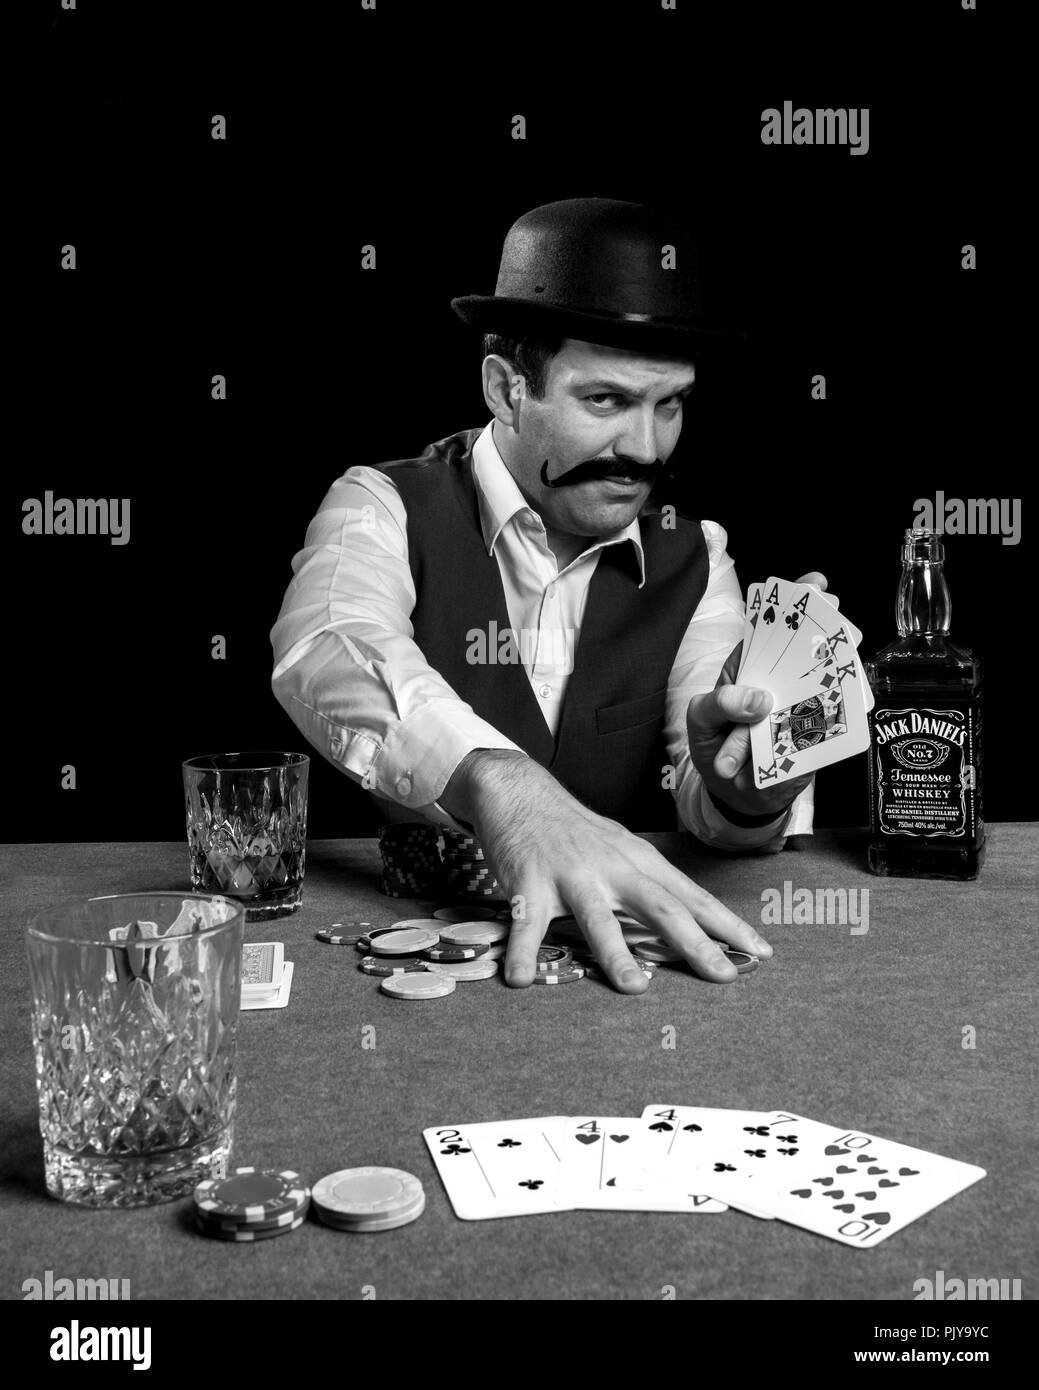 Photography of a man playing and winning a game of poker drinking a bottle of jack daniel's whisky fake vintage old melon hat, alcohol Stock Photo